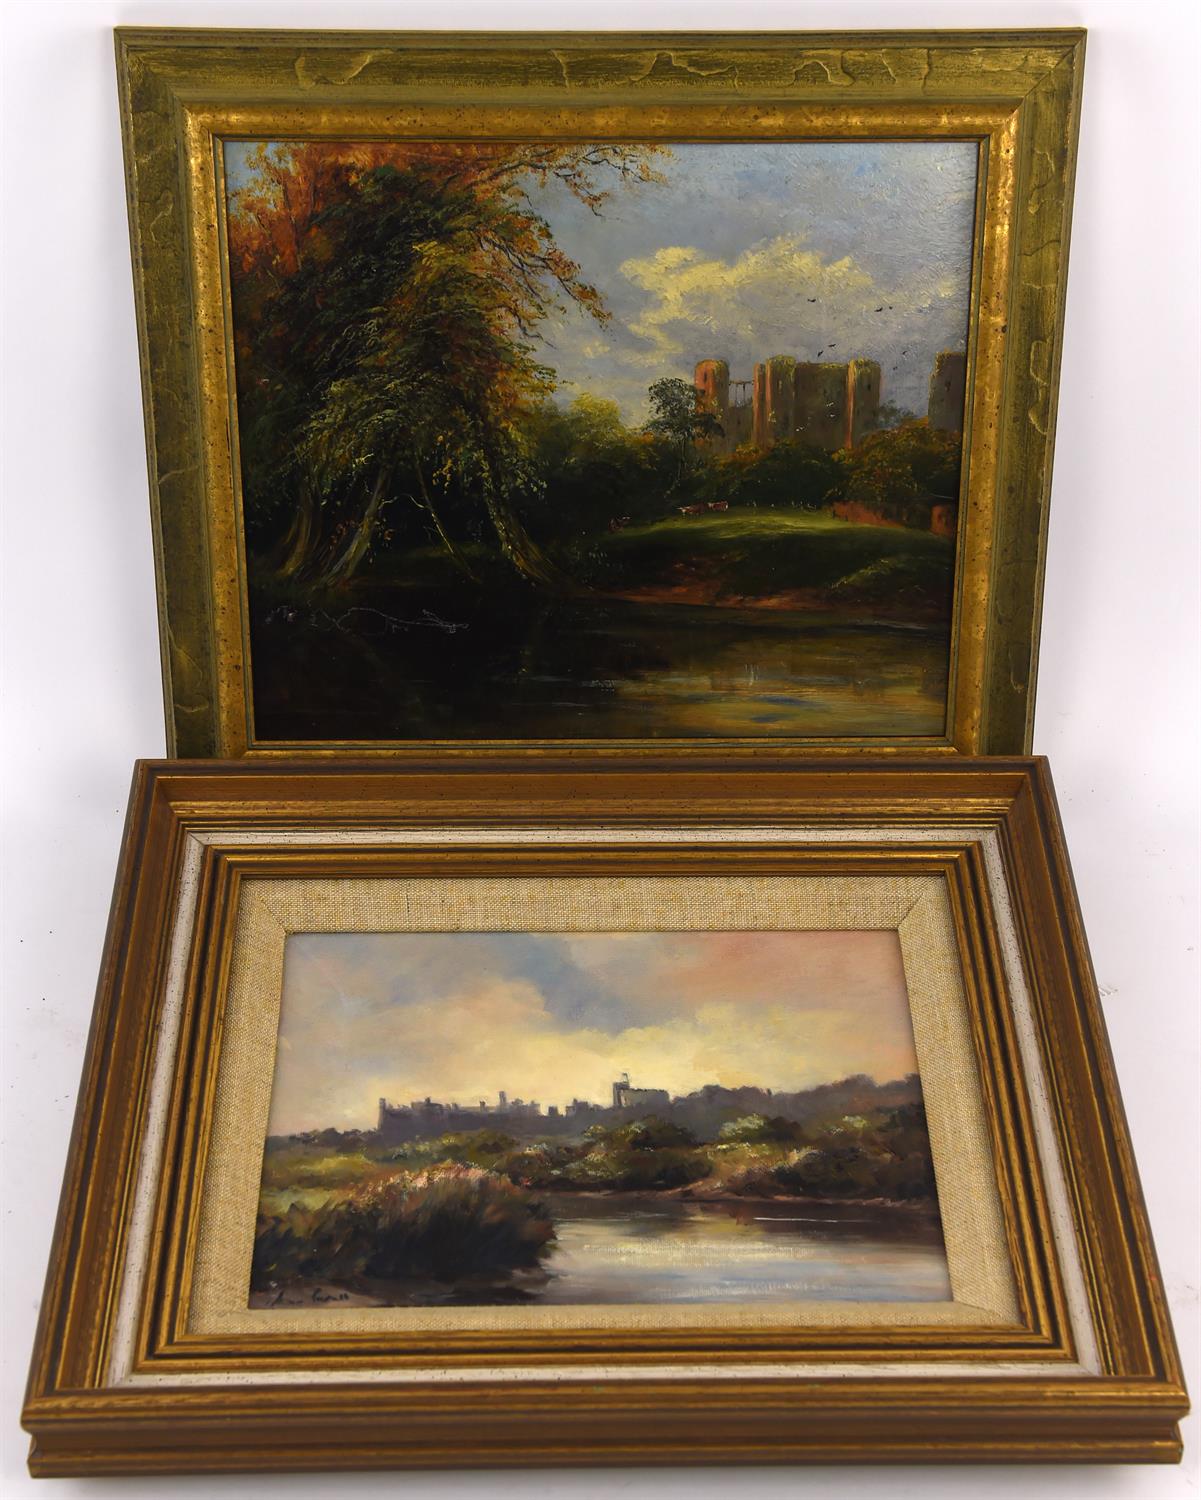 Jean Purnell (20th century), Arundel Castle, oil on canvasboard, signed lower left, 20 x 256.5cm.